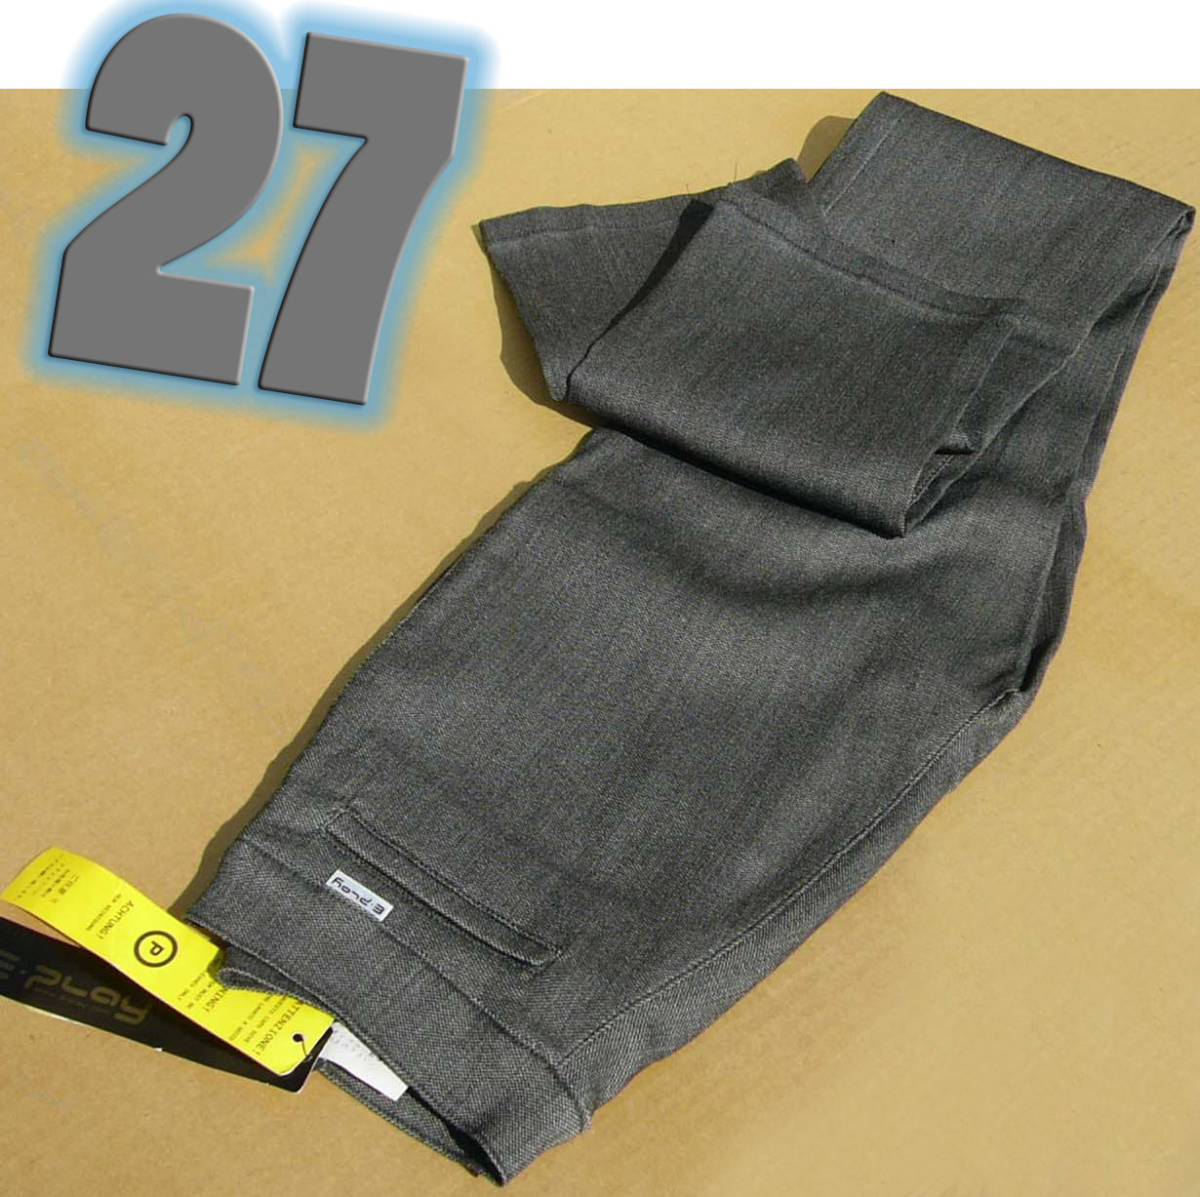  prompt decision *e-PLAY* color is .... superfine stretch pt* gray 27* new goods *ITALY